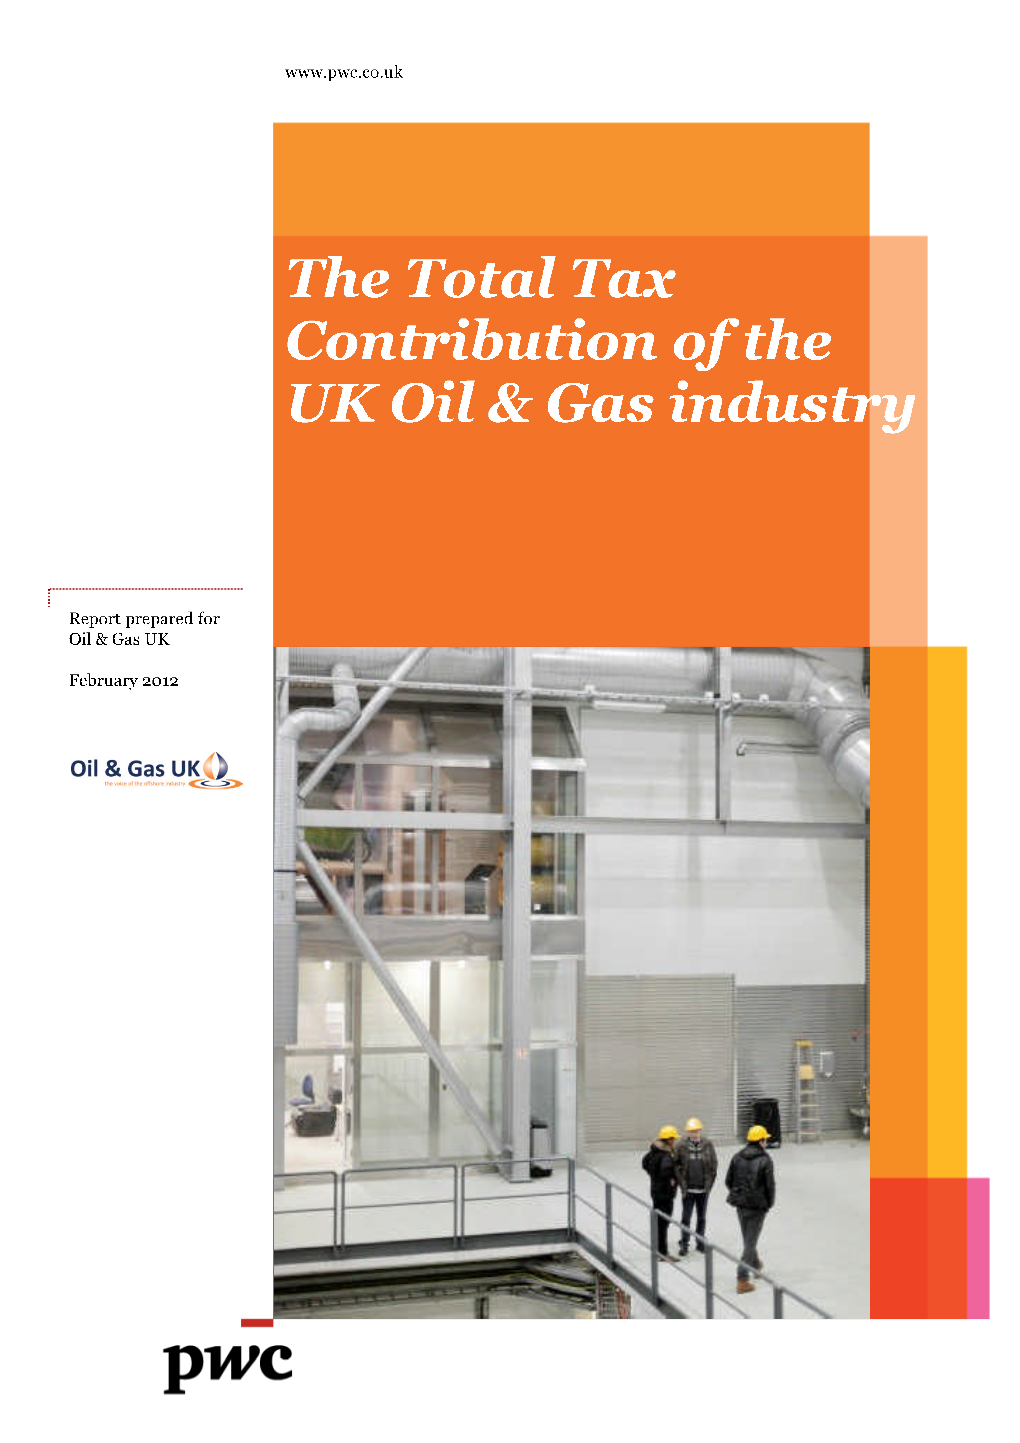 The Total Tax Contribution of the UK Oil & Gas Industry